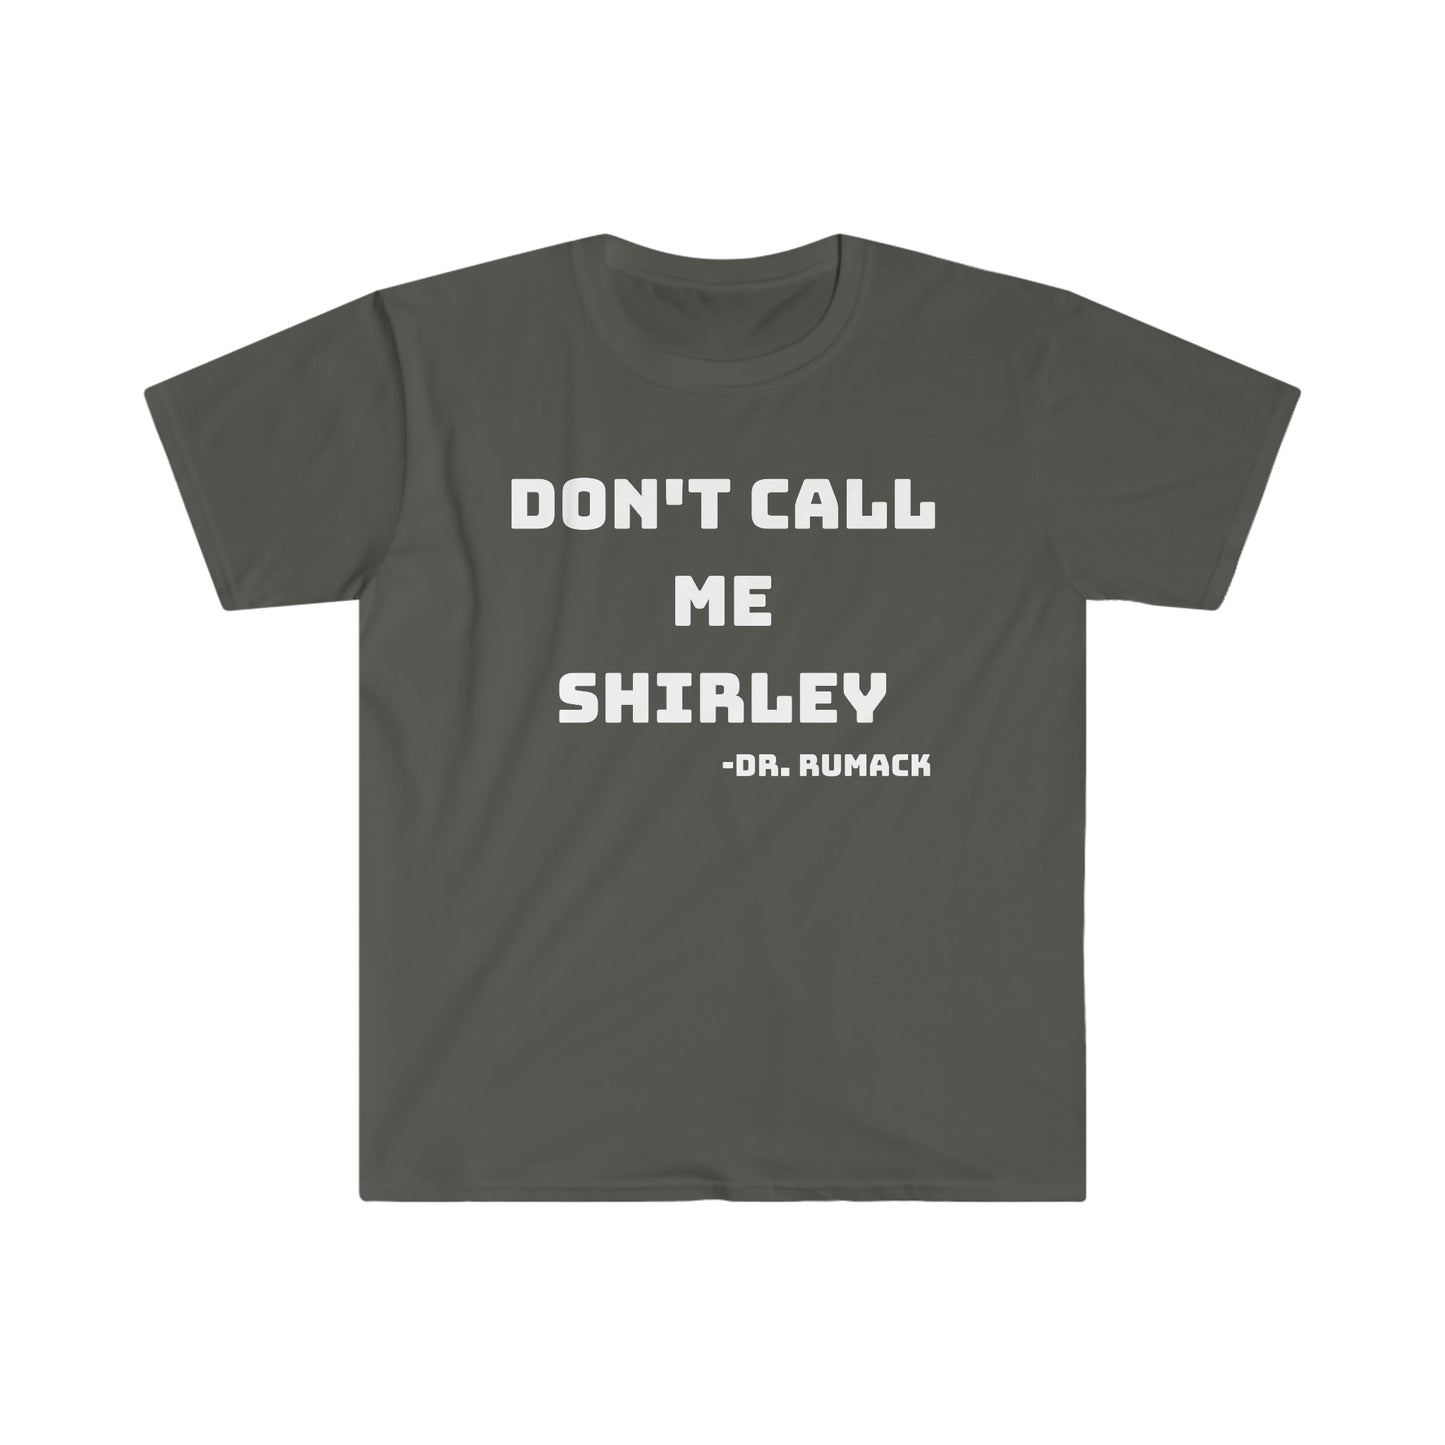 Don't Call Me Shirley! Airplane Movie Quote T-Shirt